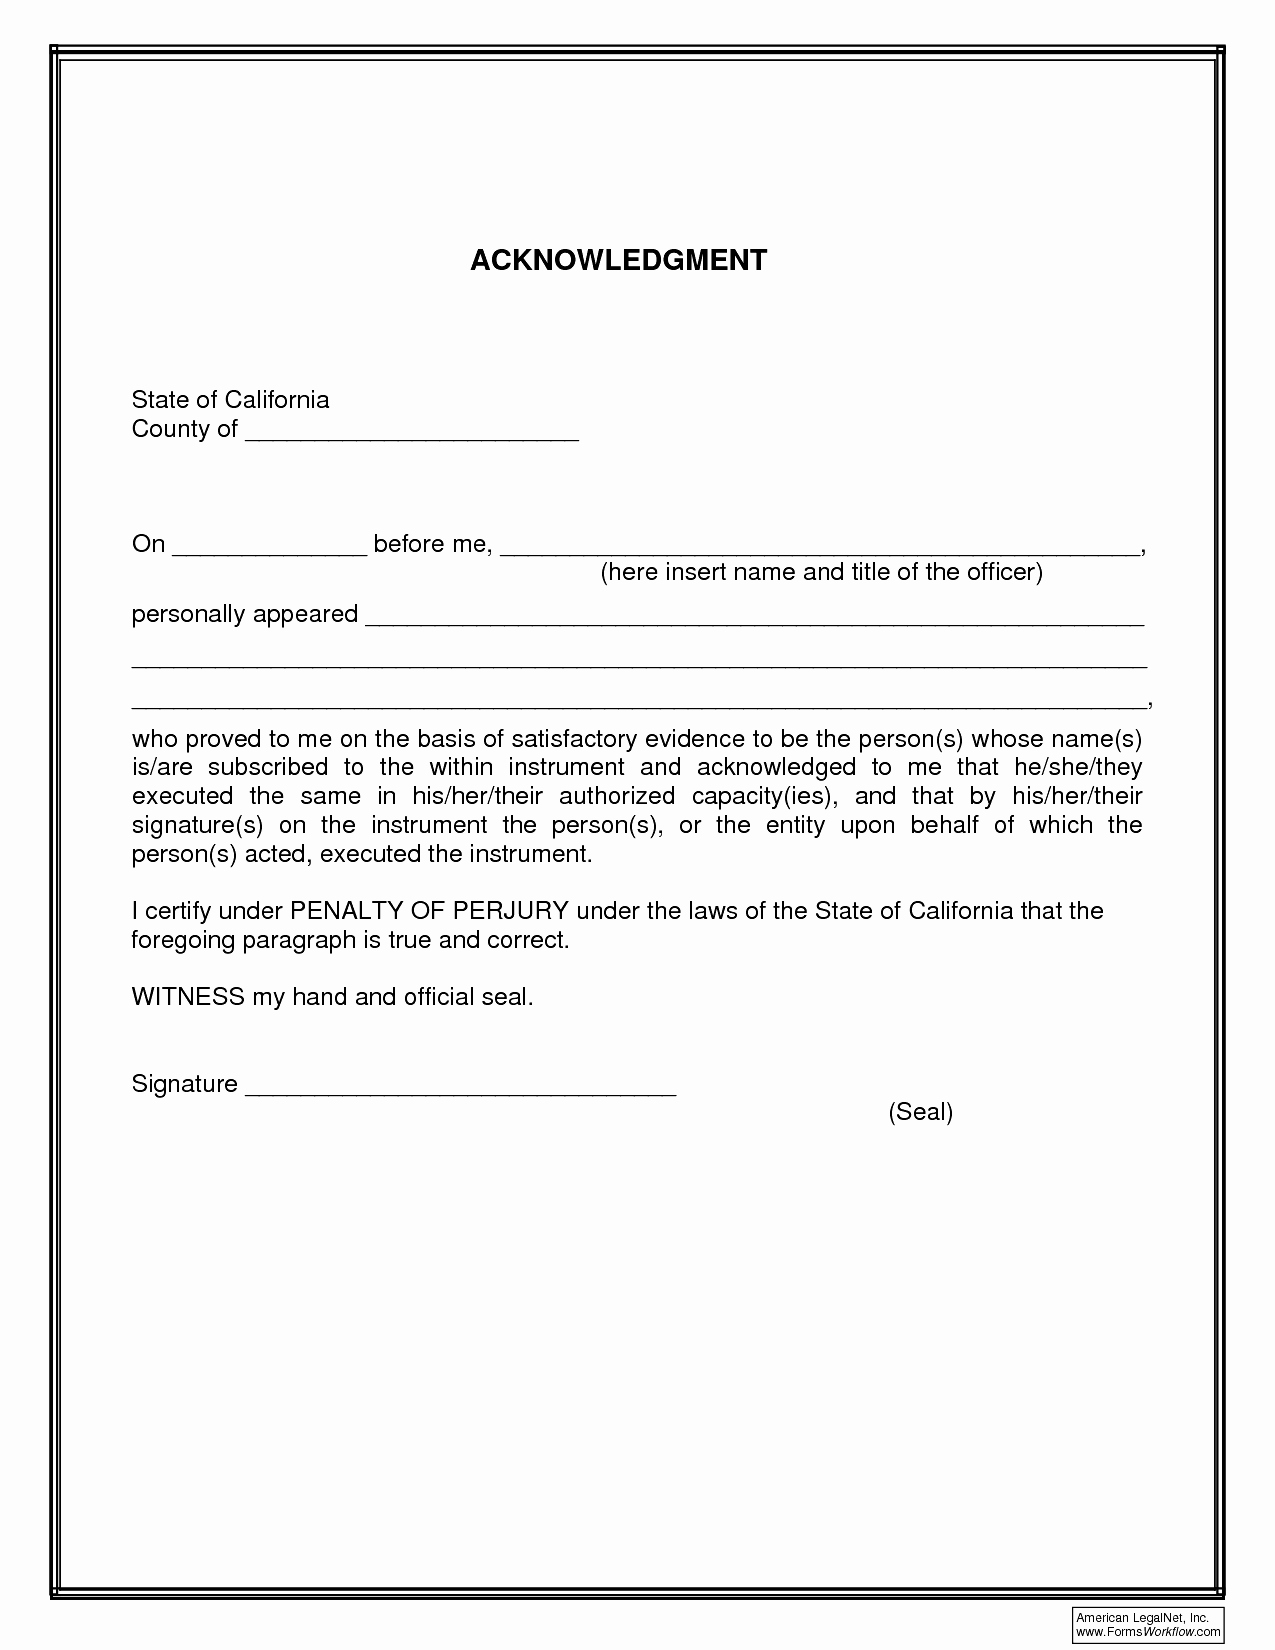 Acknowledgement Of Receipt form Template Best Of Acknowledgement Certificate Templates